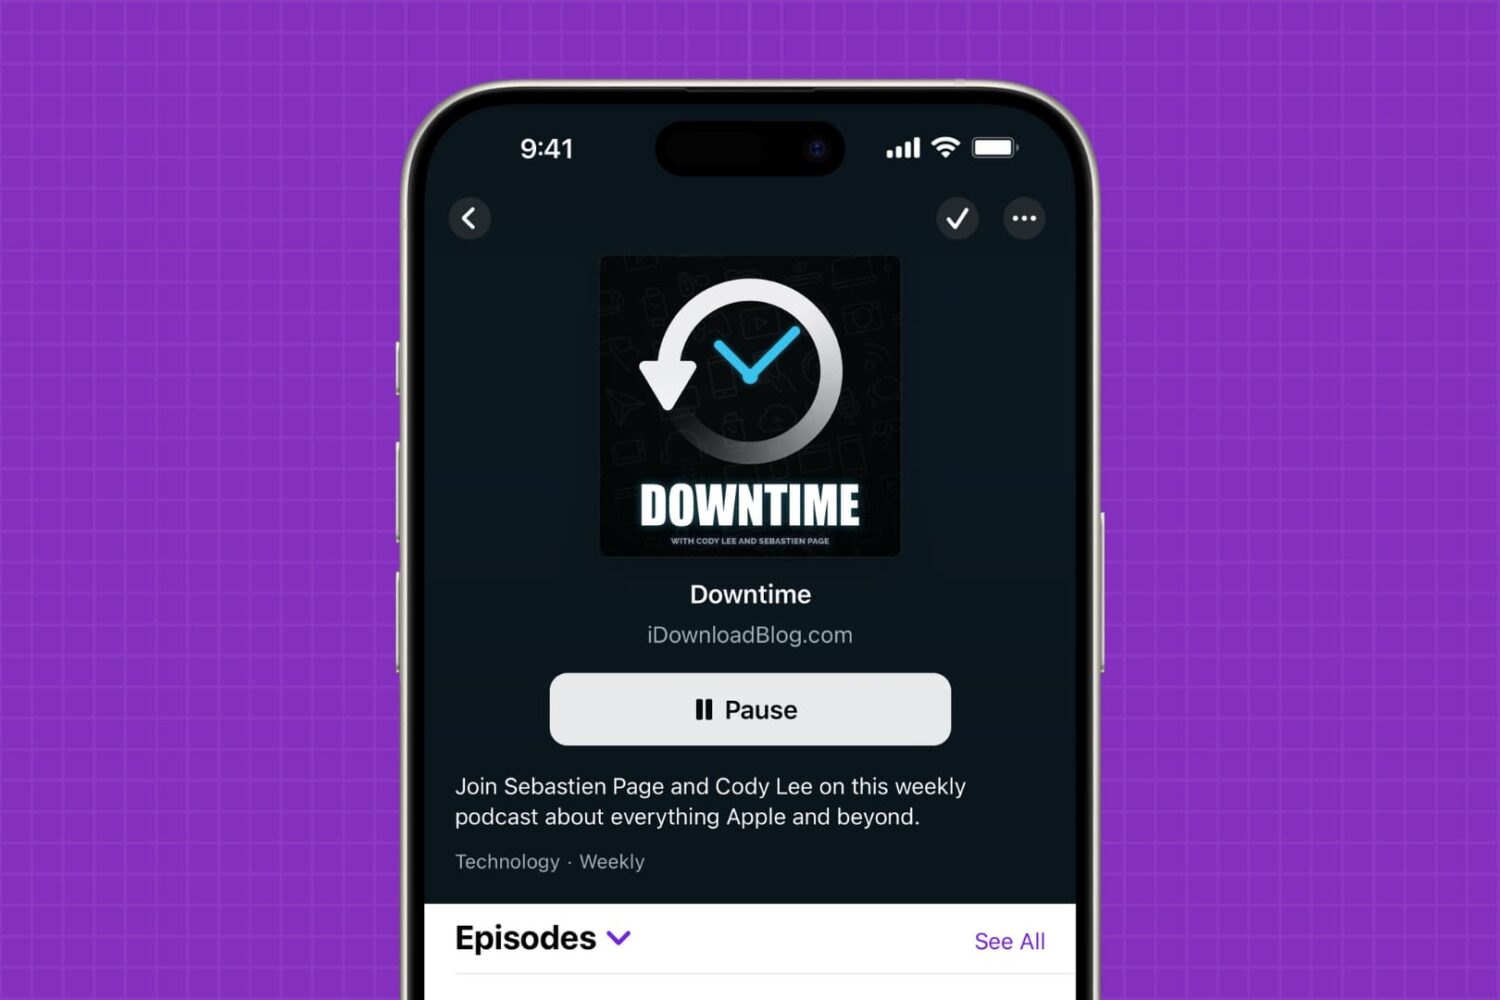 Apple Podcasts app on iPhone showing iDownloadBlog's Downtime show on the screen